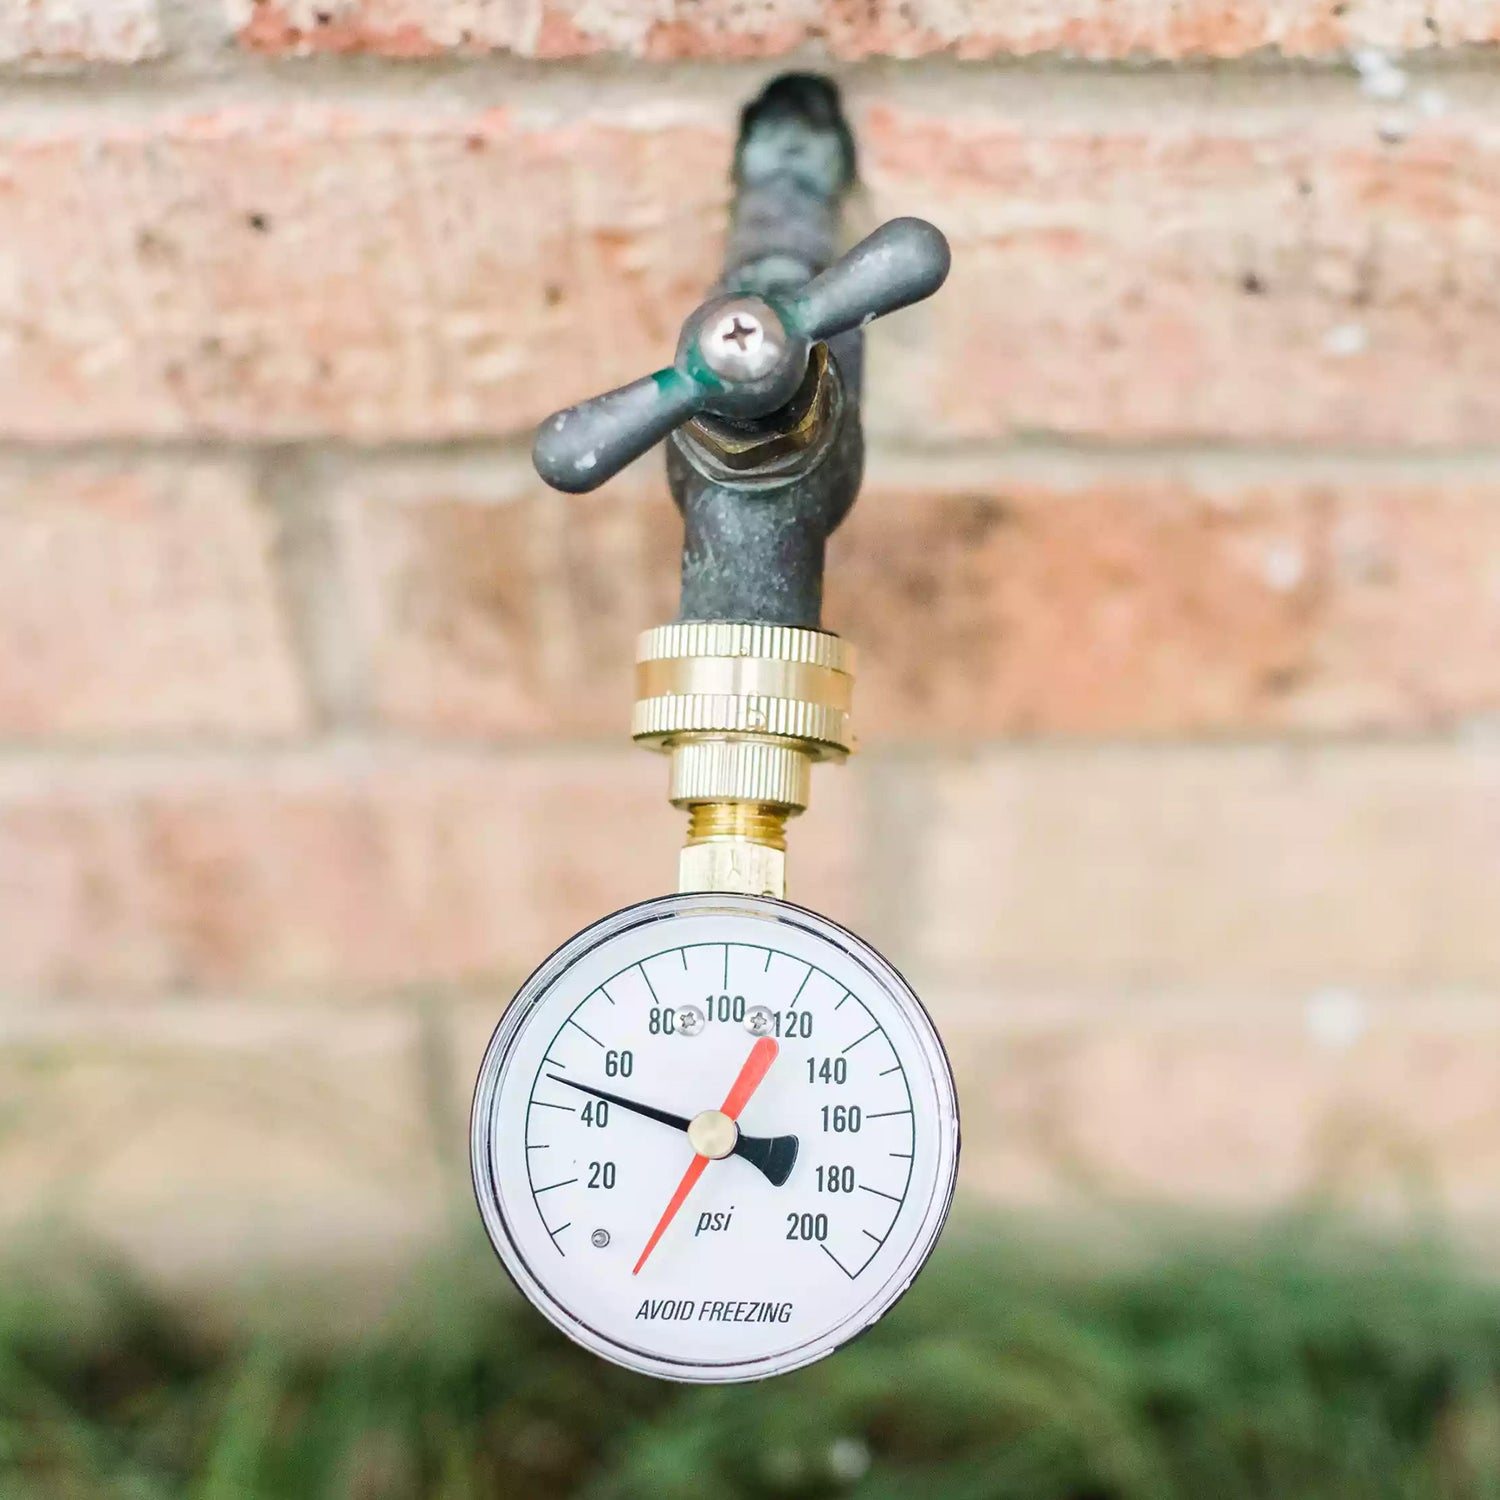 Calculating the pressure of your drip irrigation system